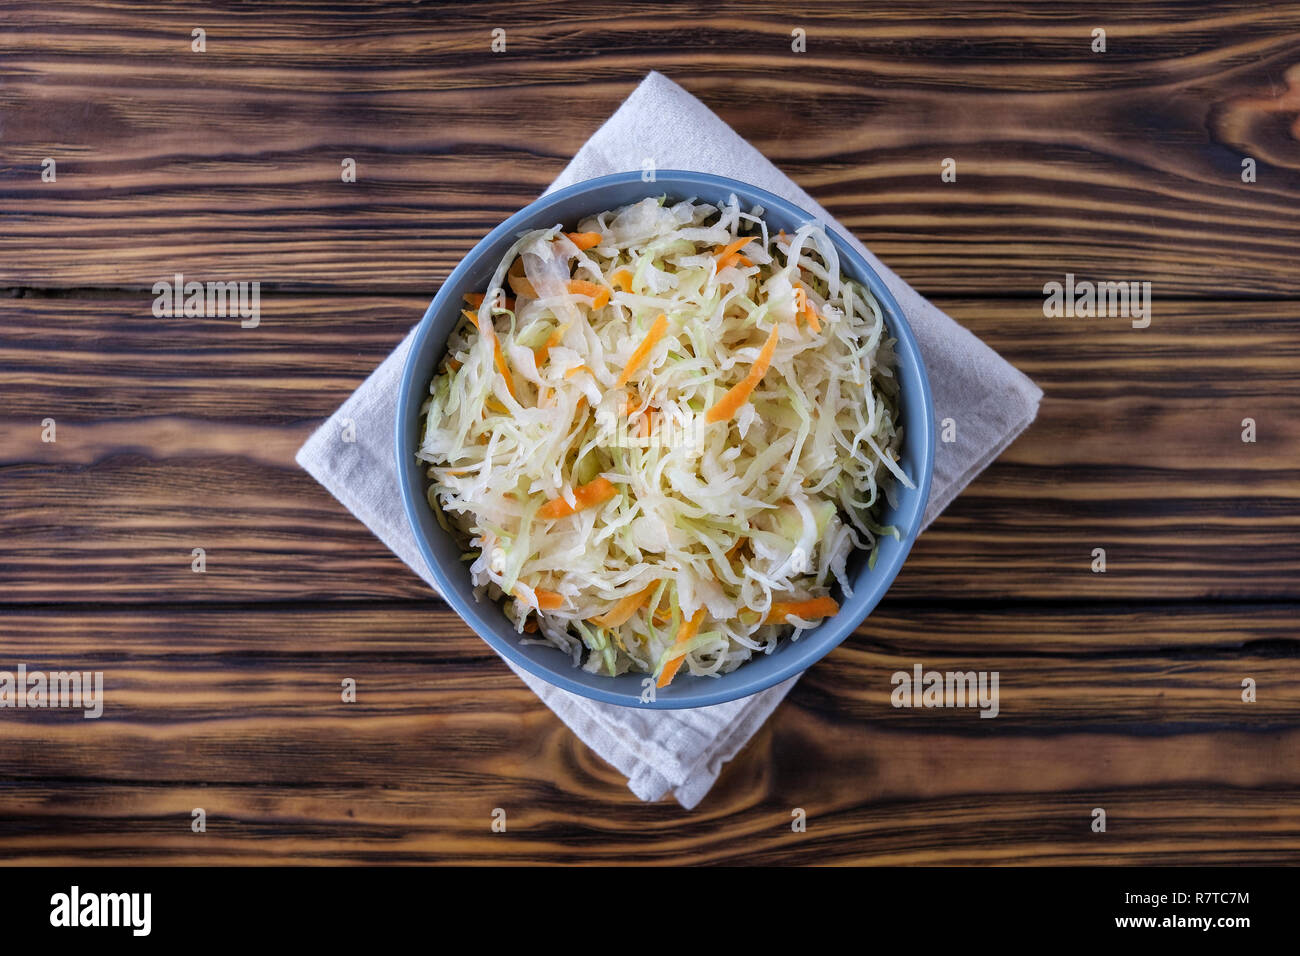 From above shot of ceramic bowl of palatable fermented cabbage on napkin on side of timber tabletop Stock Photo